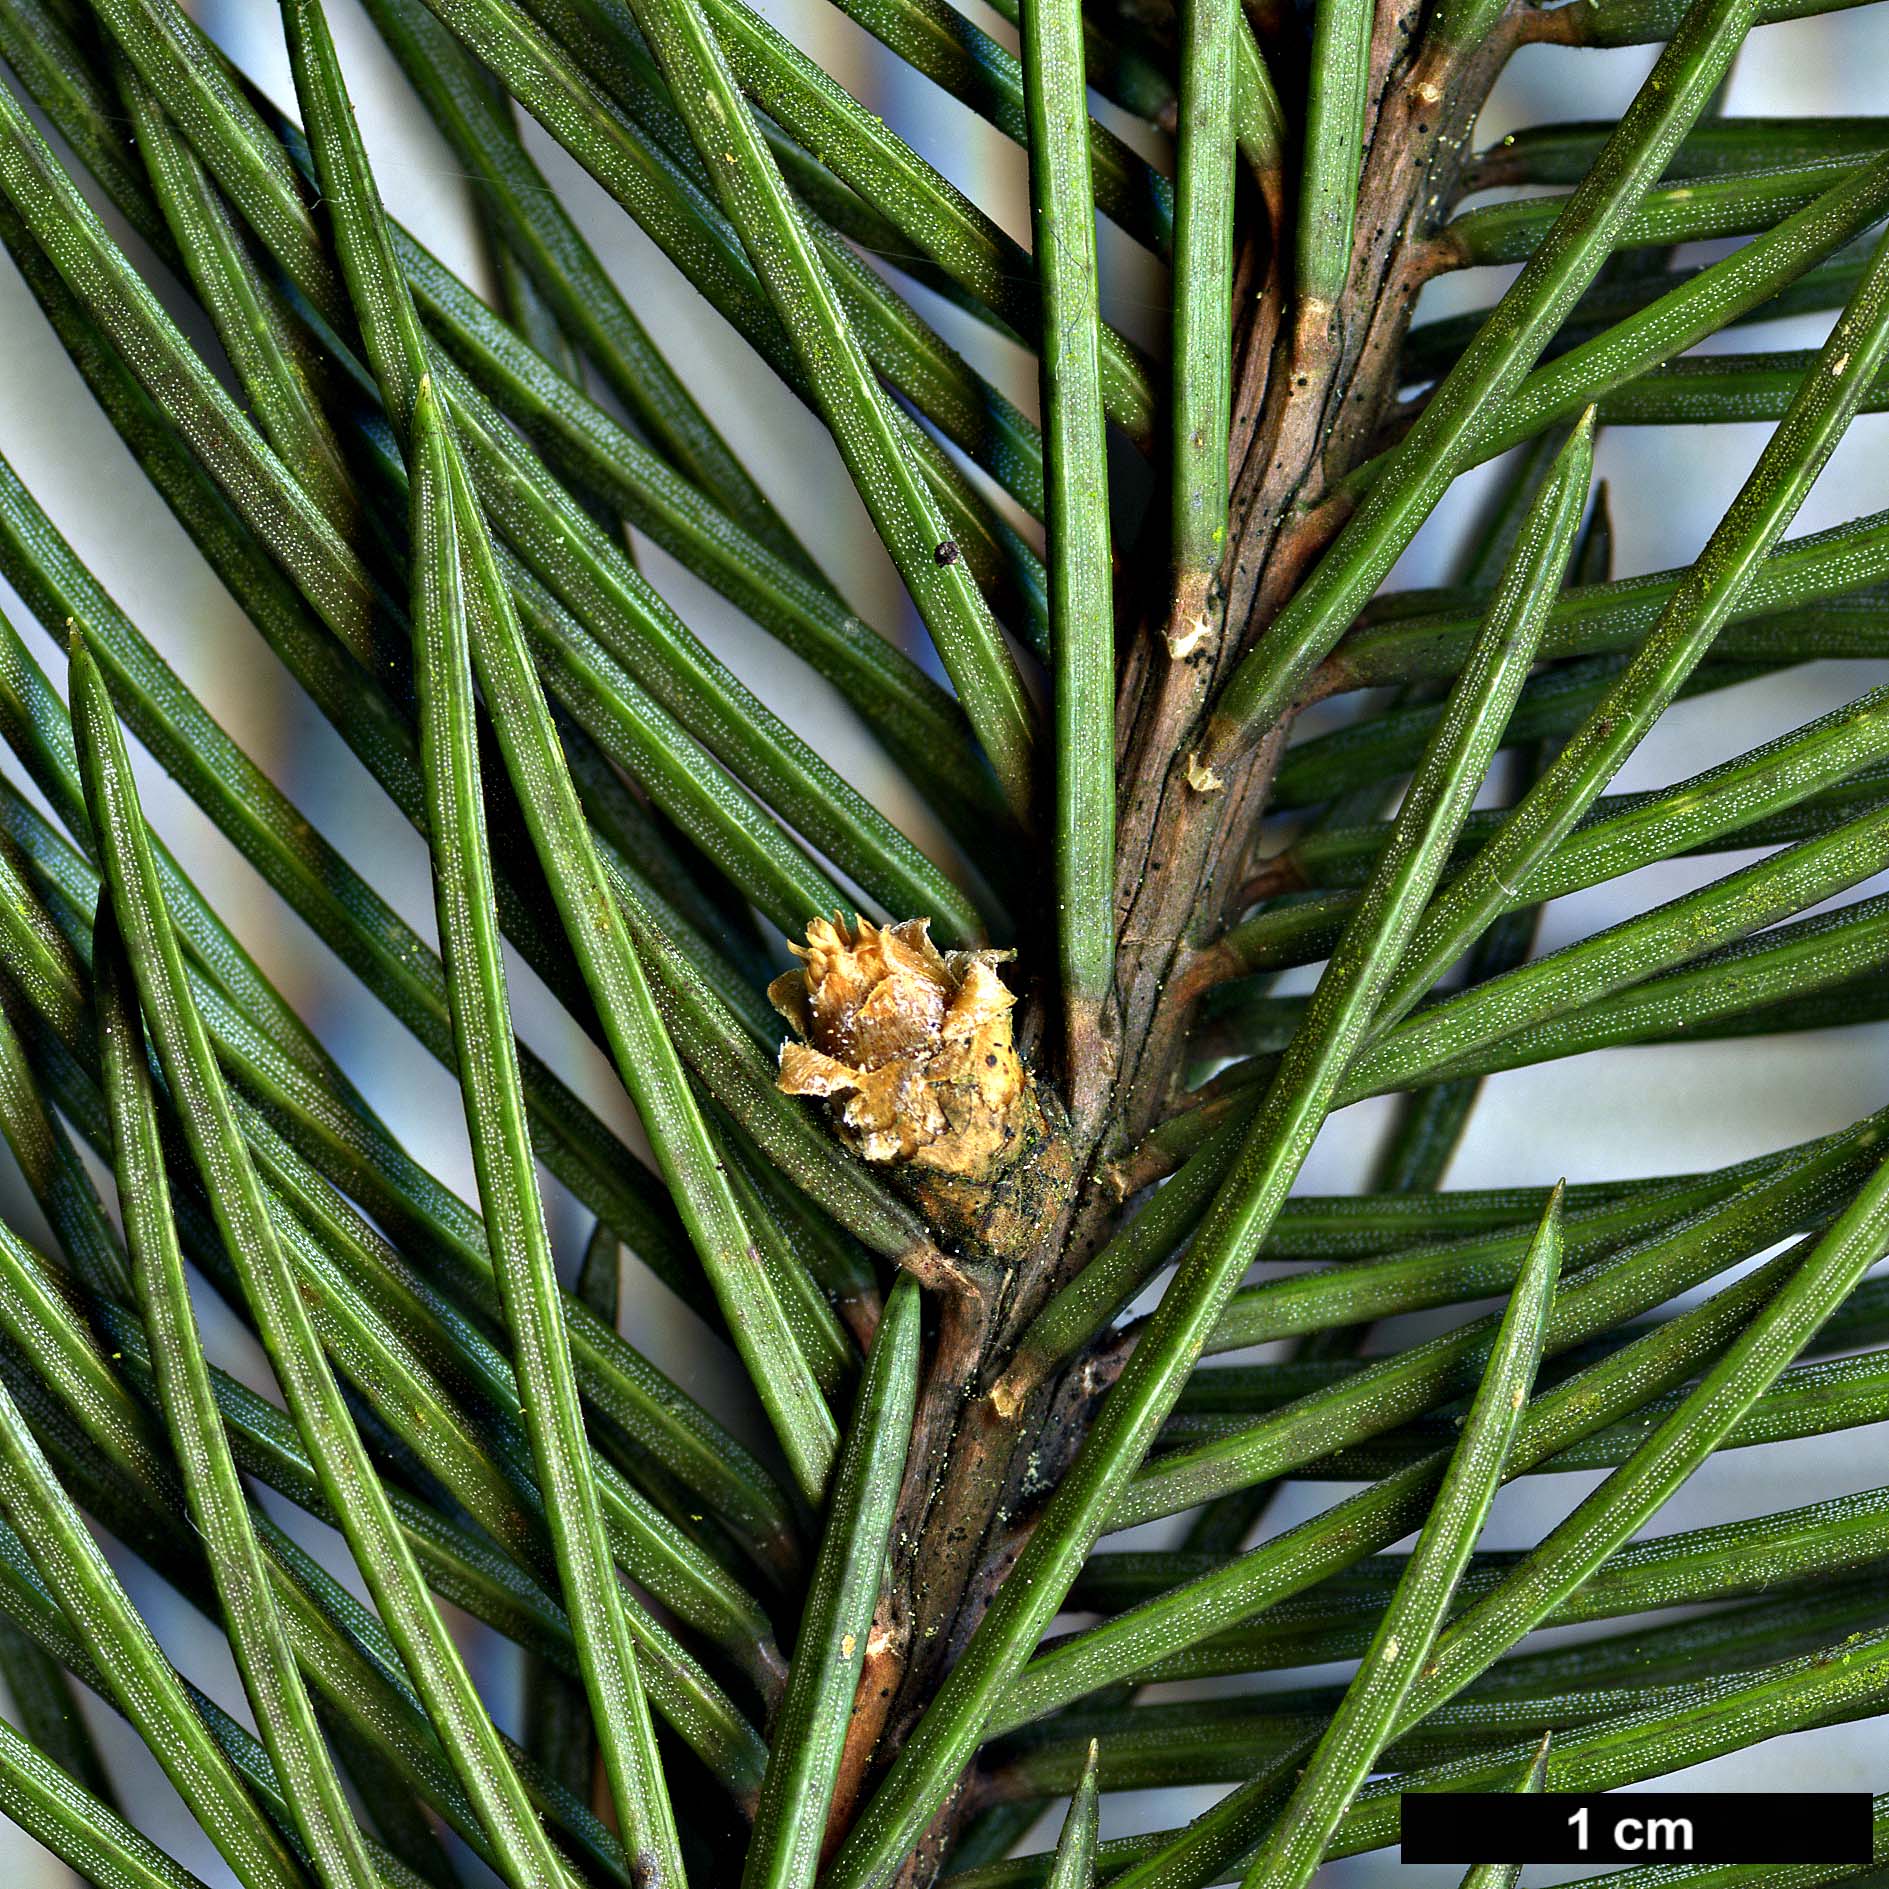 High resolution image: Family: Pinaceae - Genus: Picea - Taxon: pungens